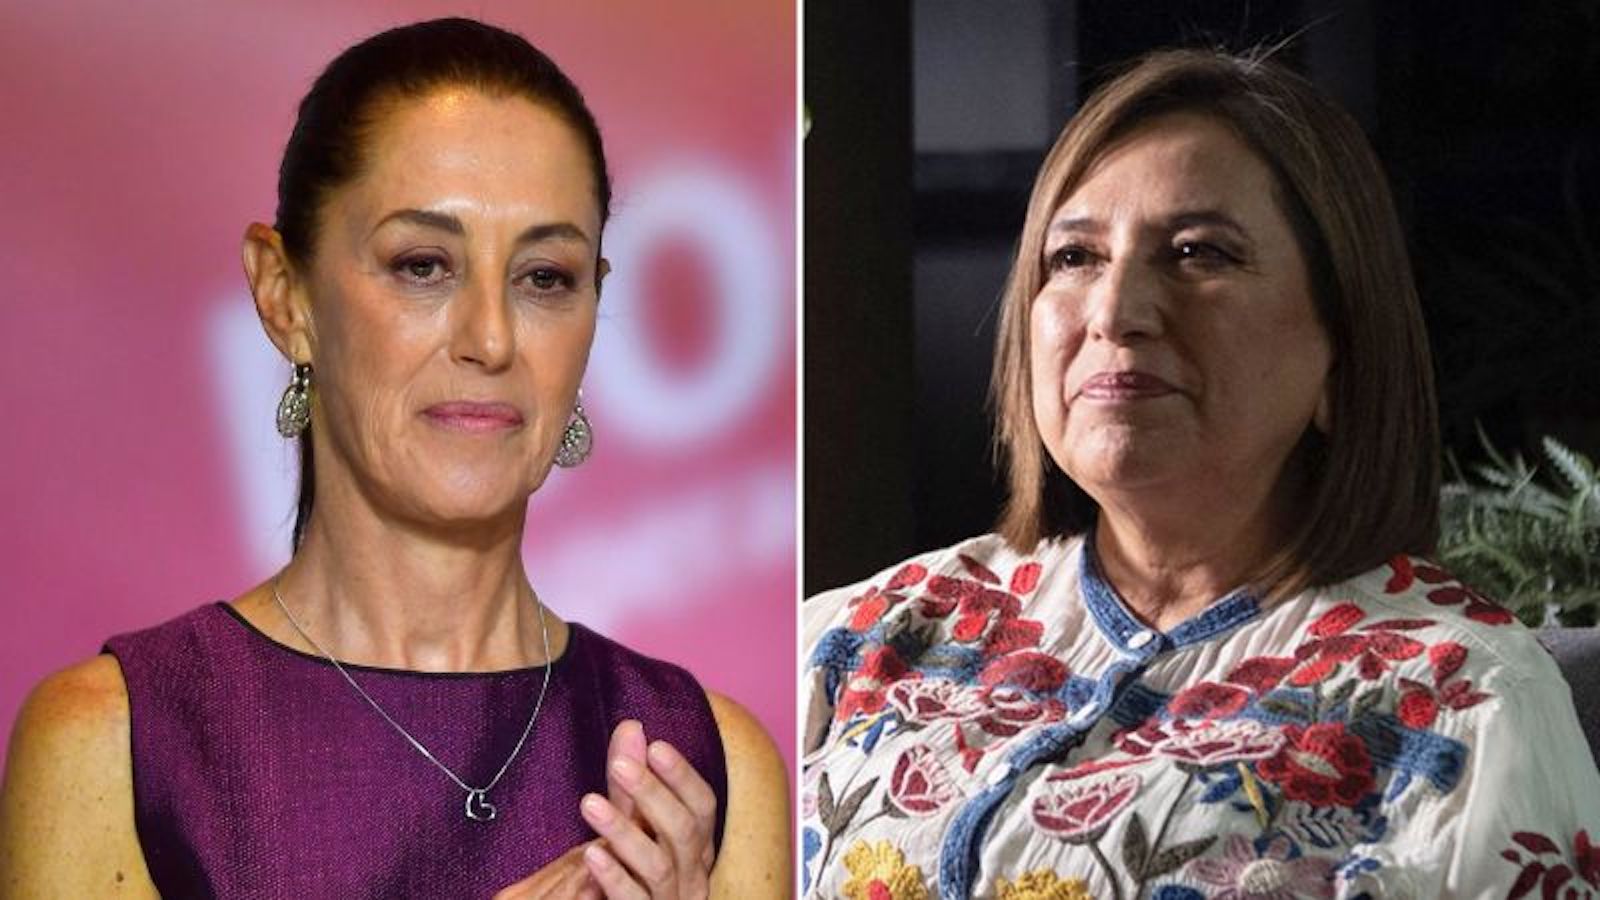 A woman is set to become the next president of machismo Mexico